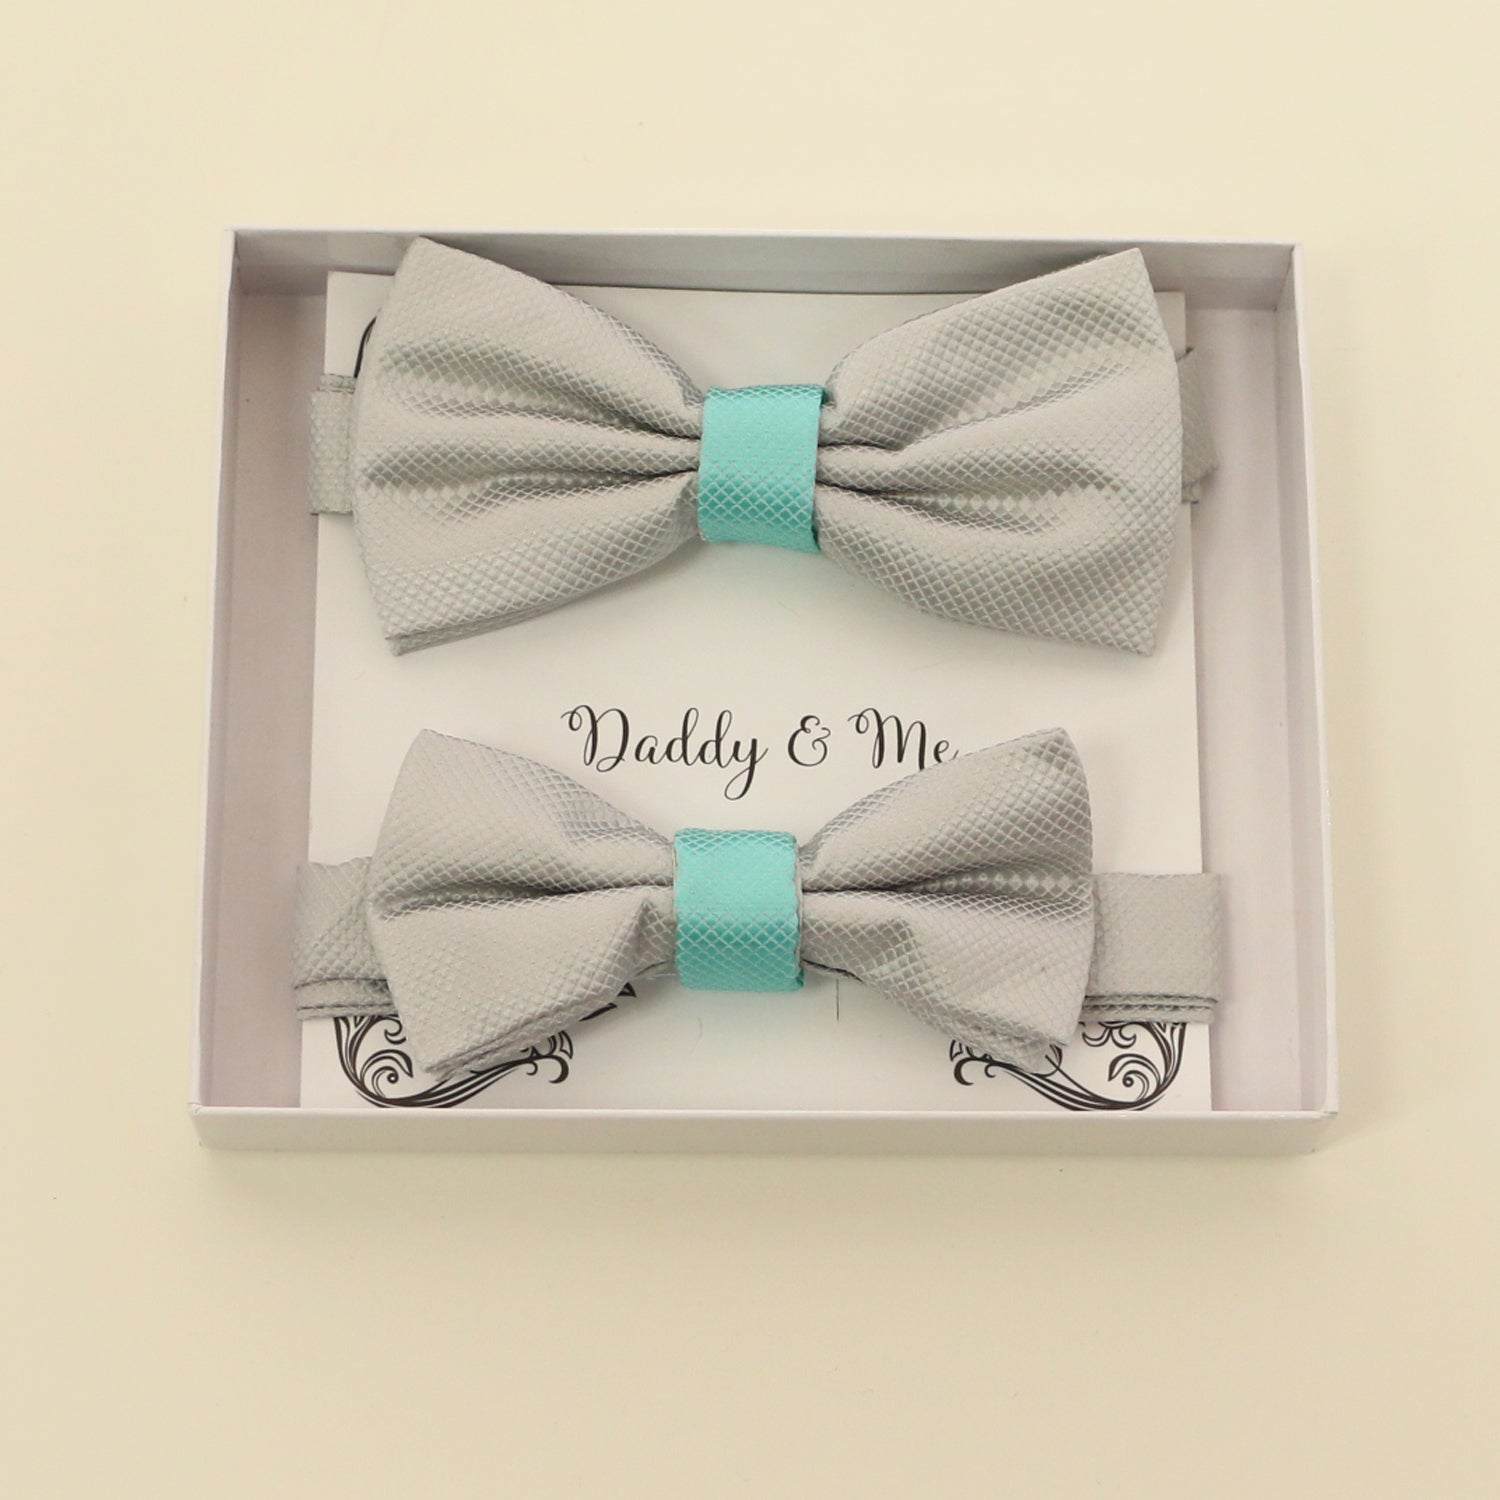 Gray and turquoise Bow tie set for daddy and son, Daddy me gift set, Father son matching, daddy me bow, handmade Gray blue bow tie for kids